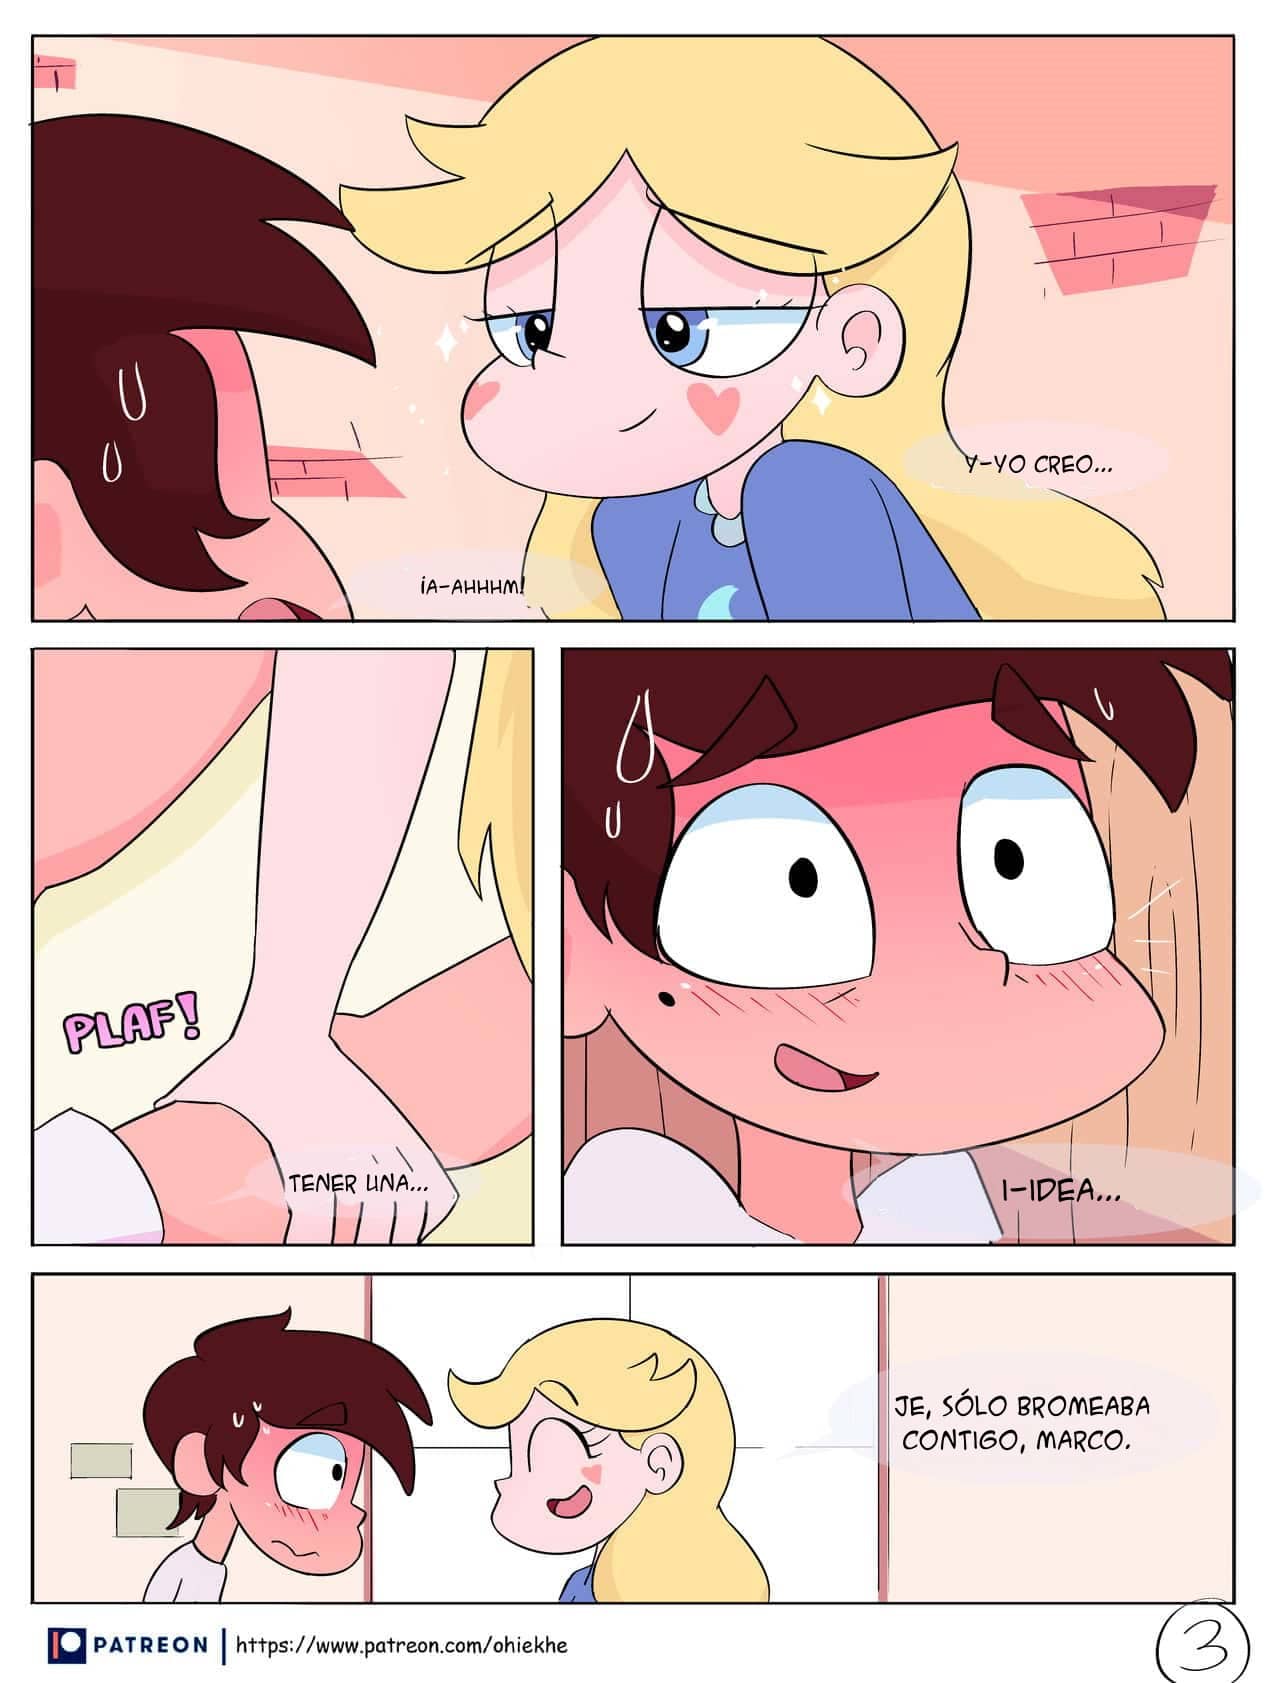 Time Alone – Star vs the Forces of Evil - 3